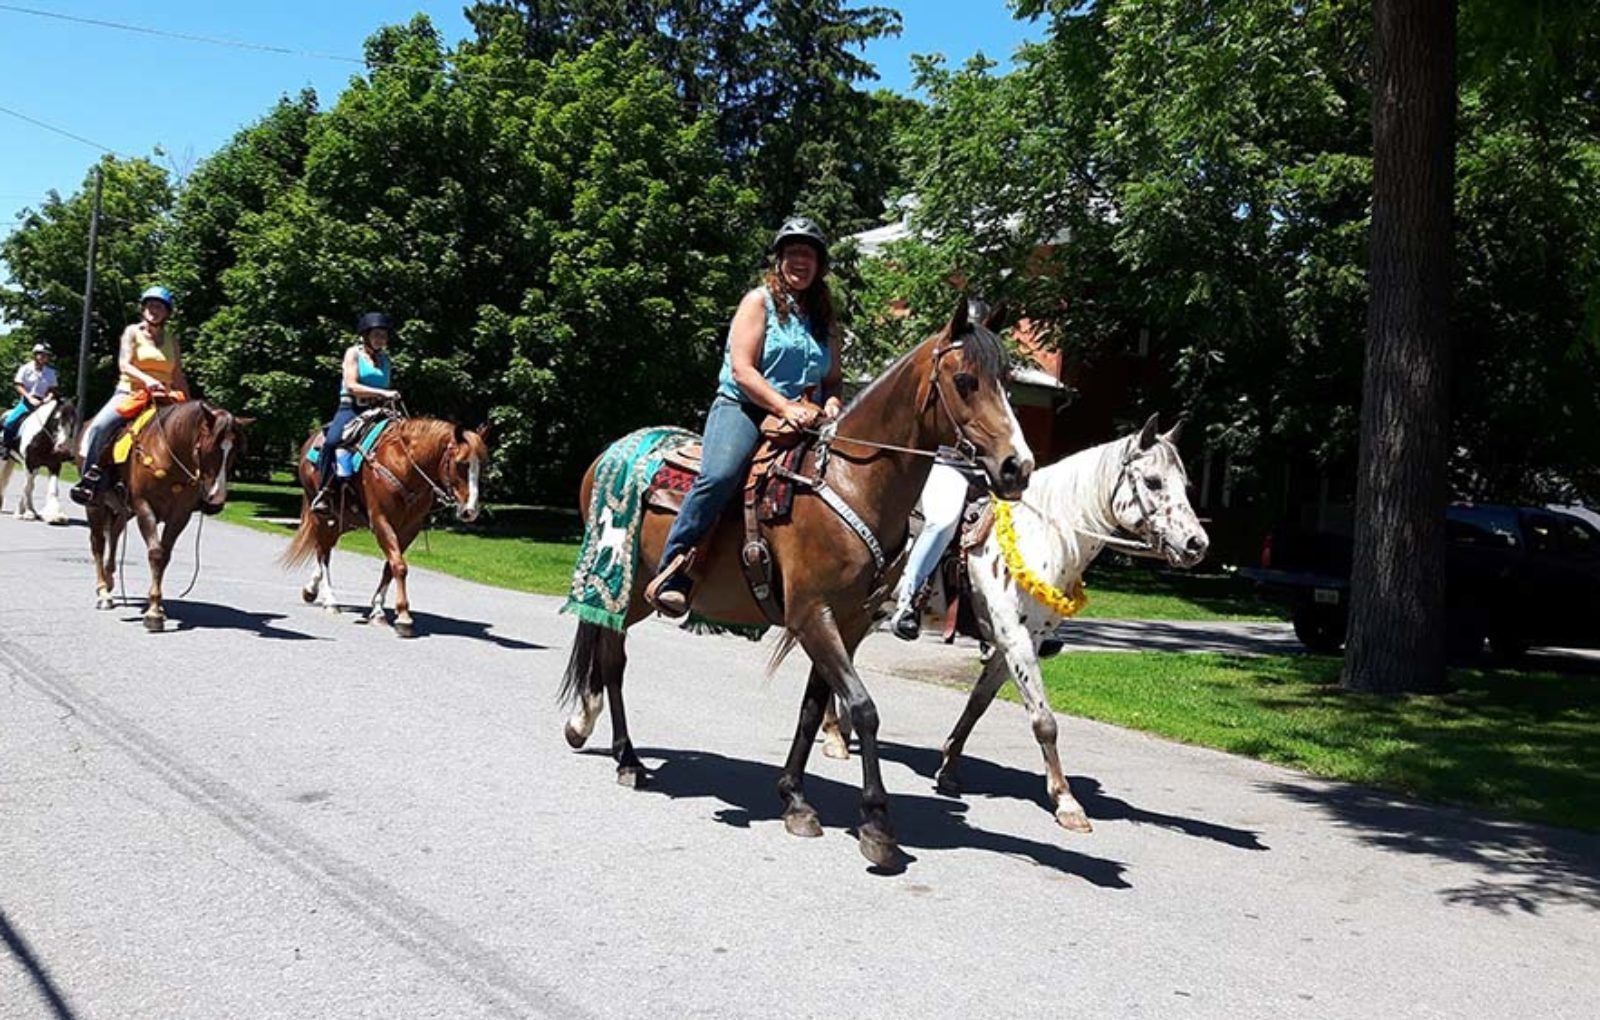 LS_July 10 2019 Horse and Buggy Parade (34)